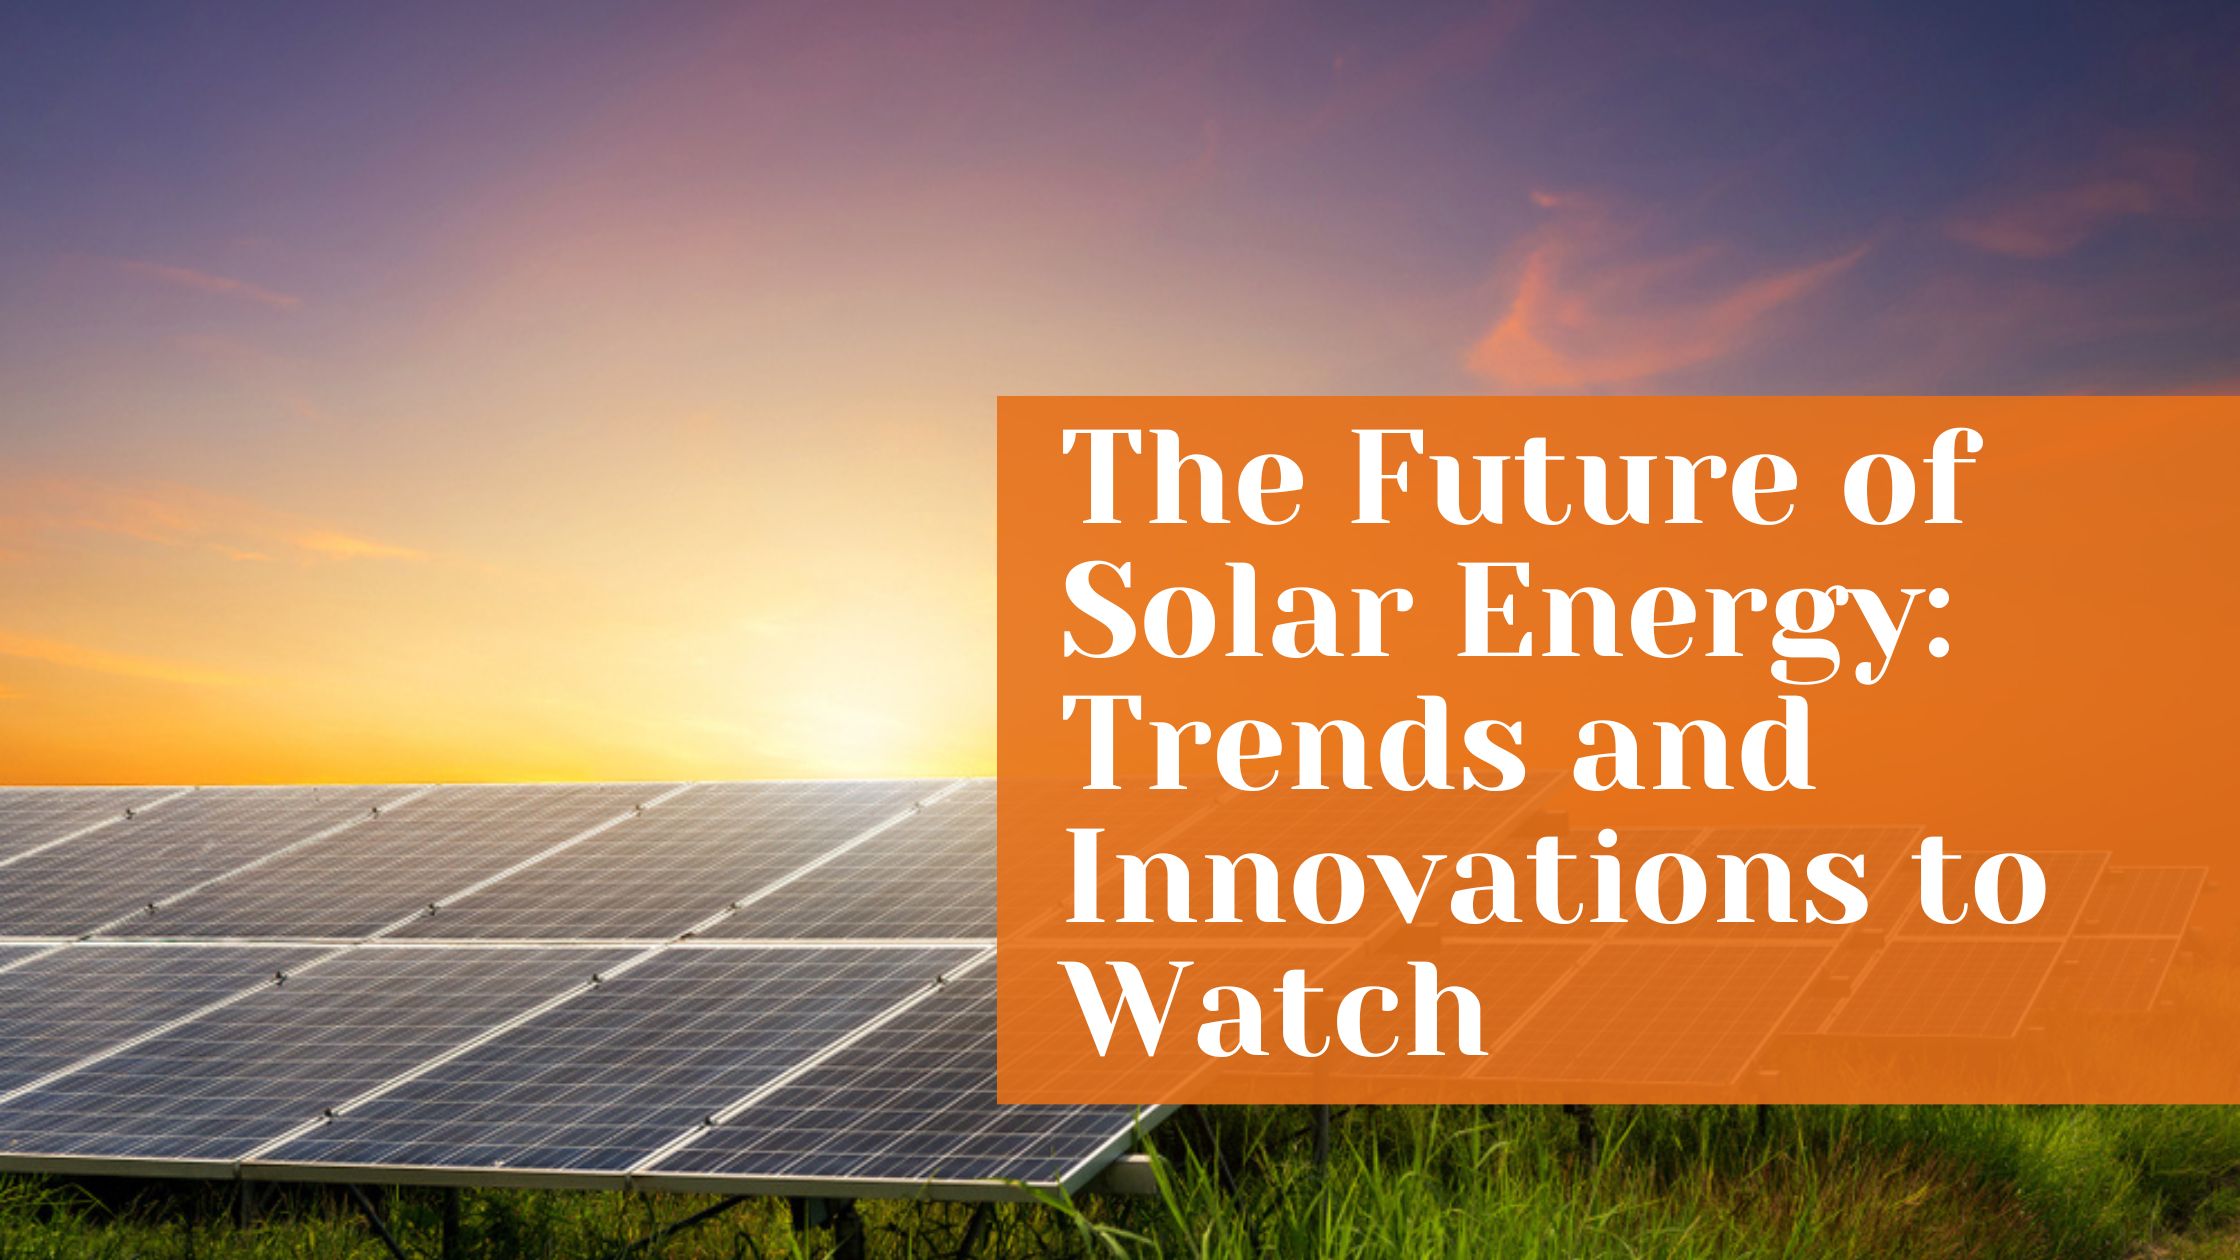 The Future of Solar Energy: Trends and Innovations to Watch